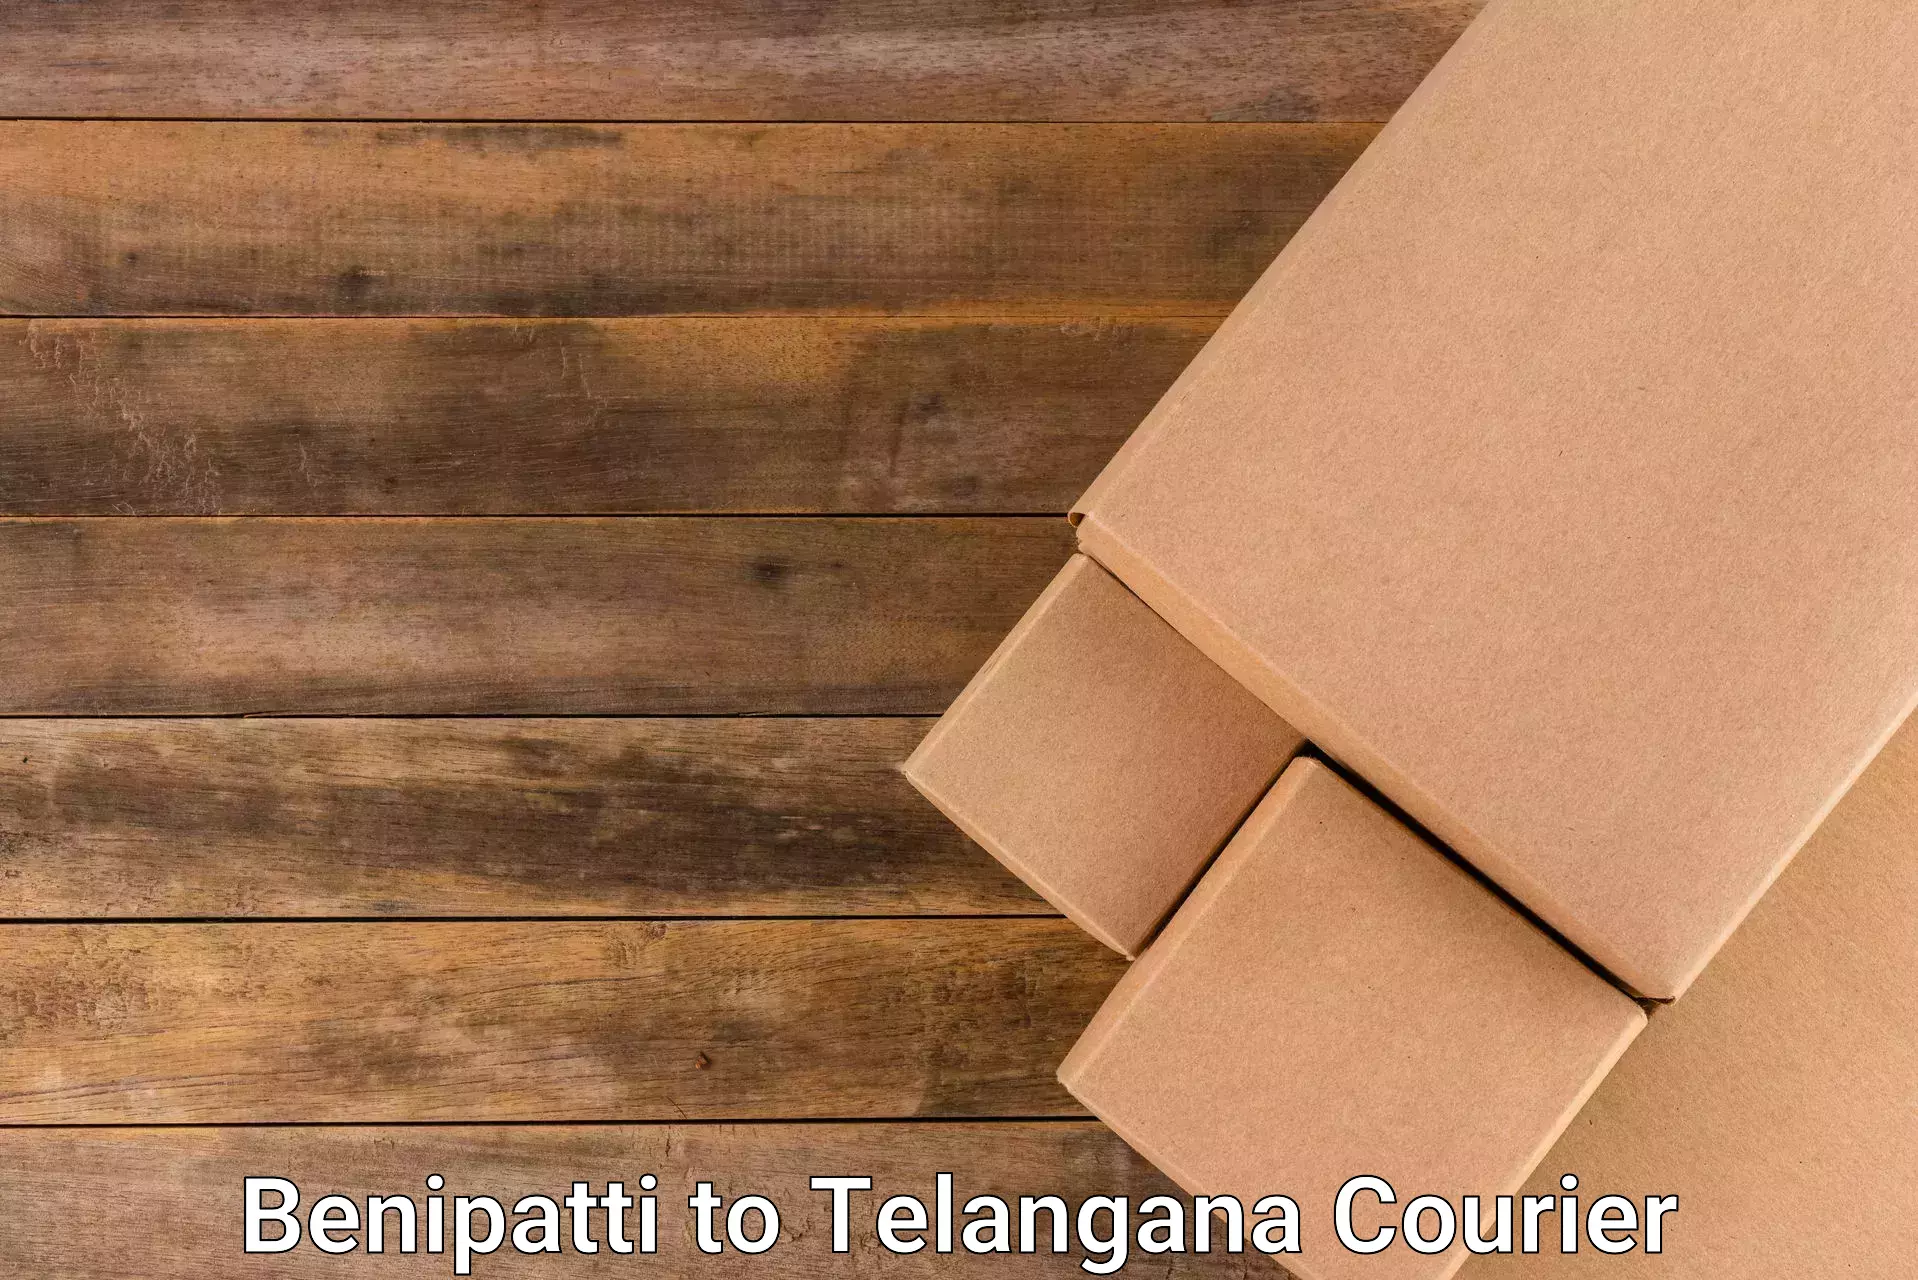 On-call courier service Benipatti to Telangana